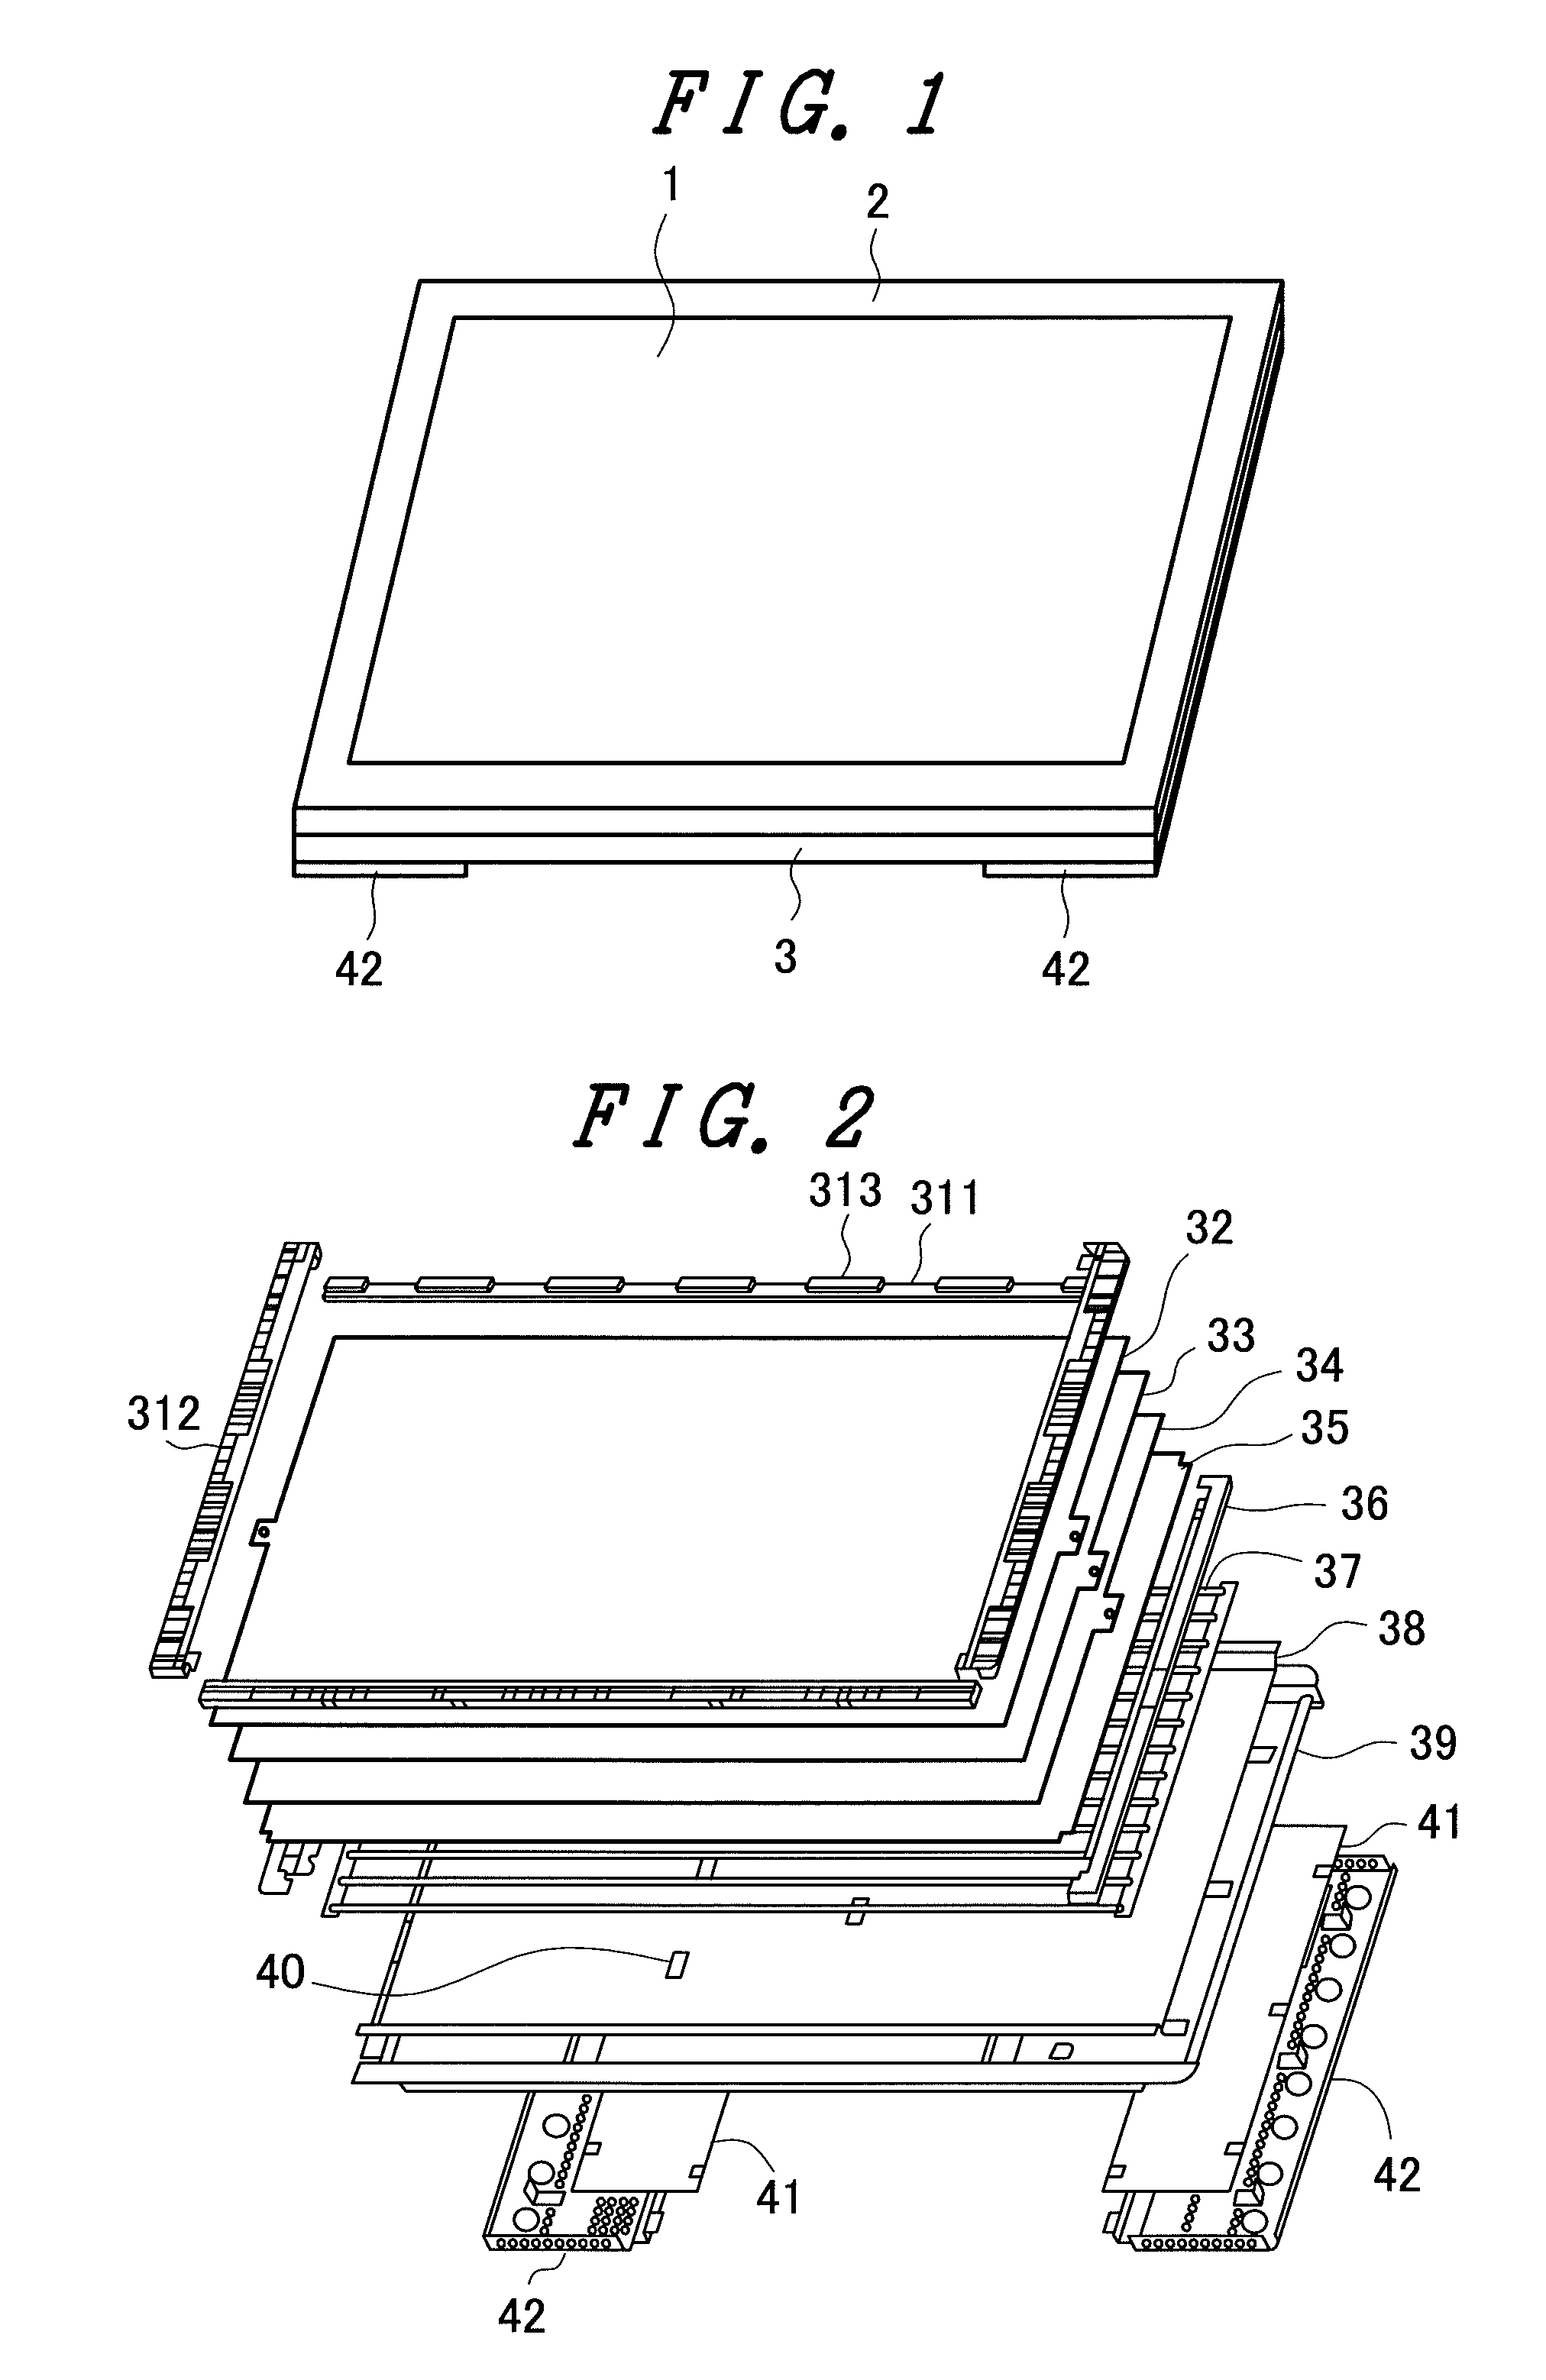 Liquid crystal display device having direct backlight with an odd number of fluorescent lamps providing enhanced brightness at center of screen